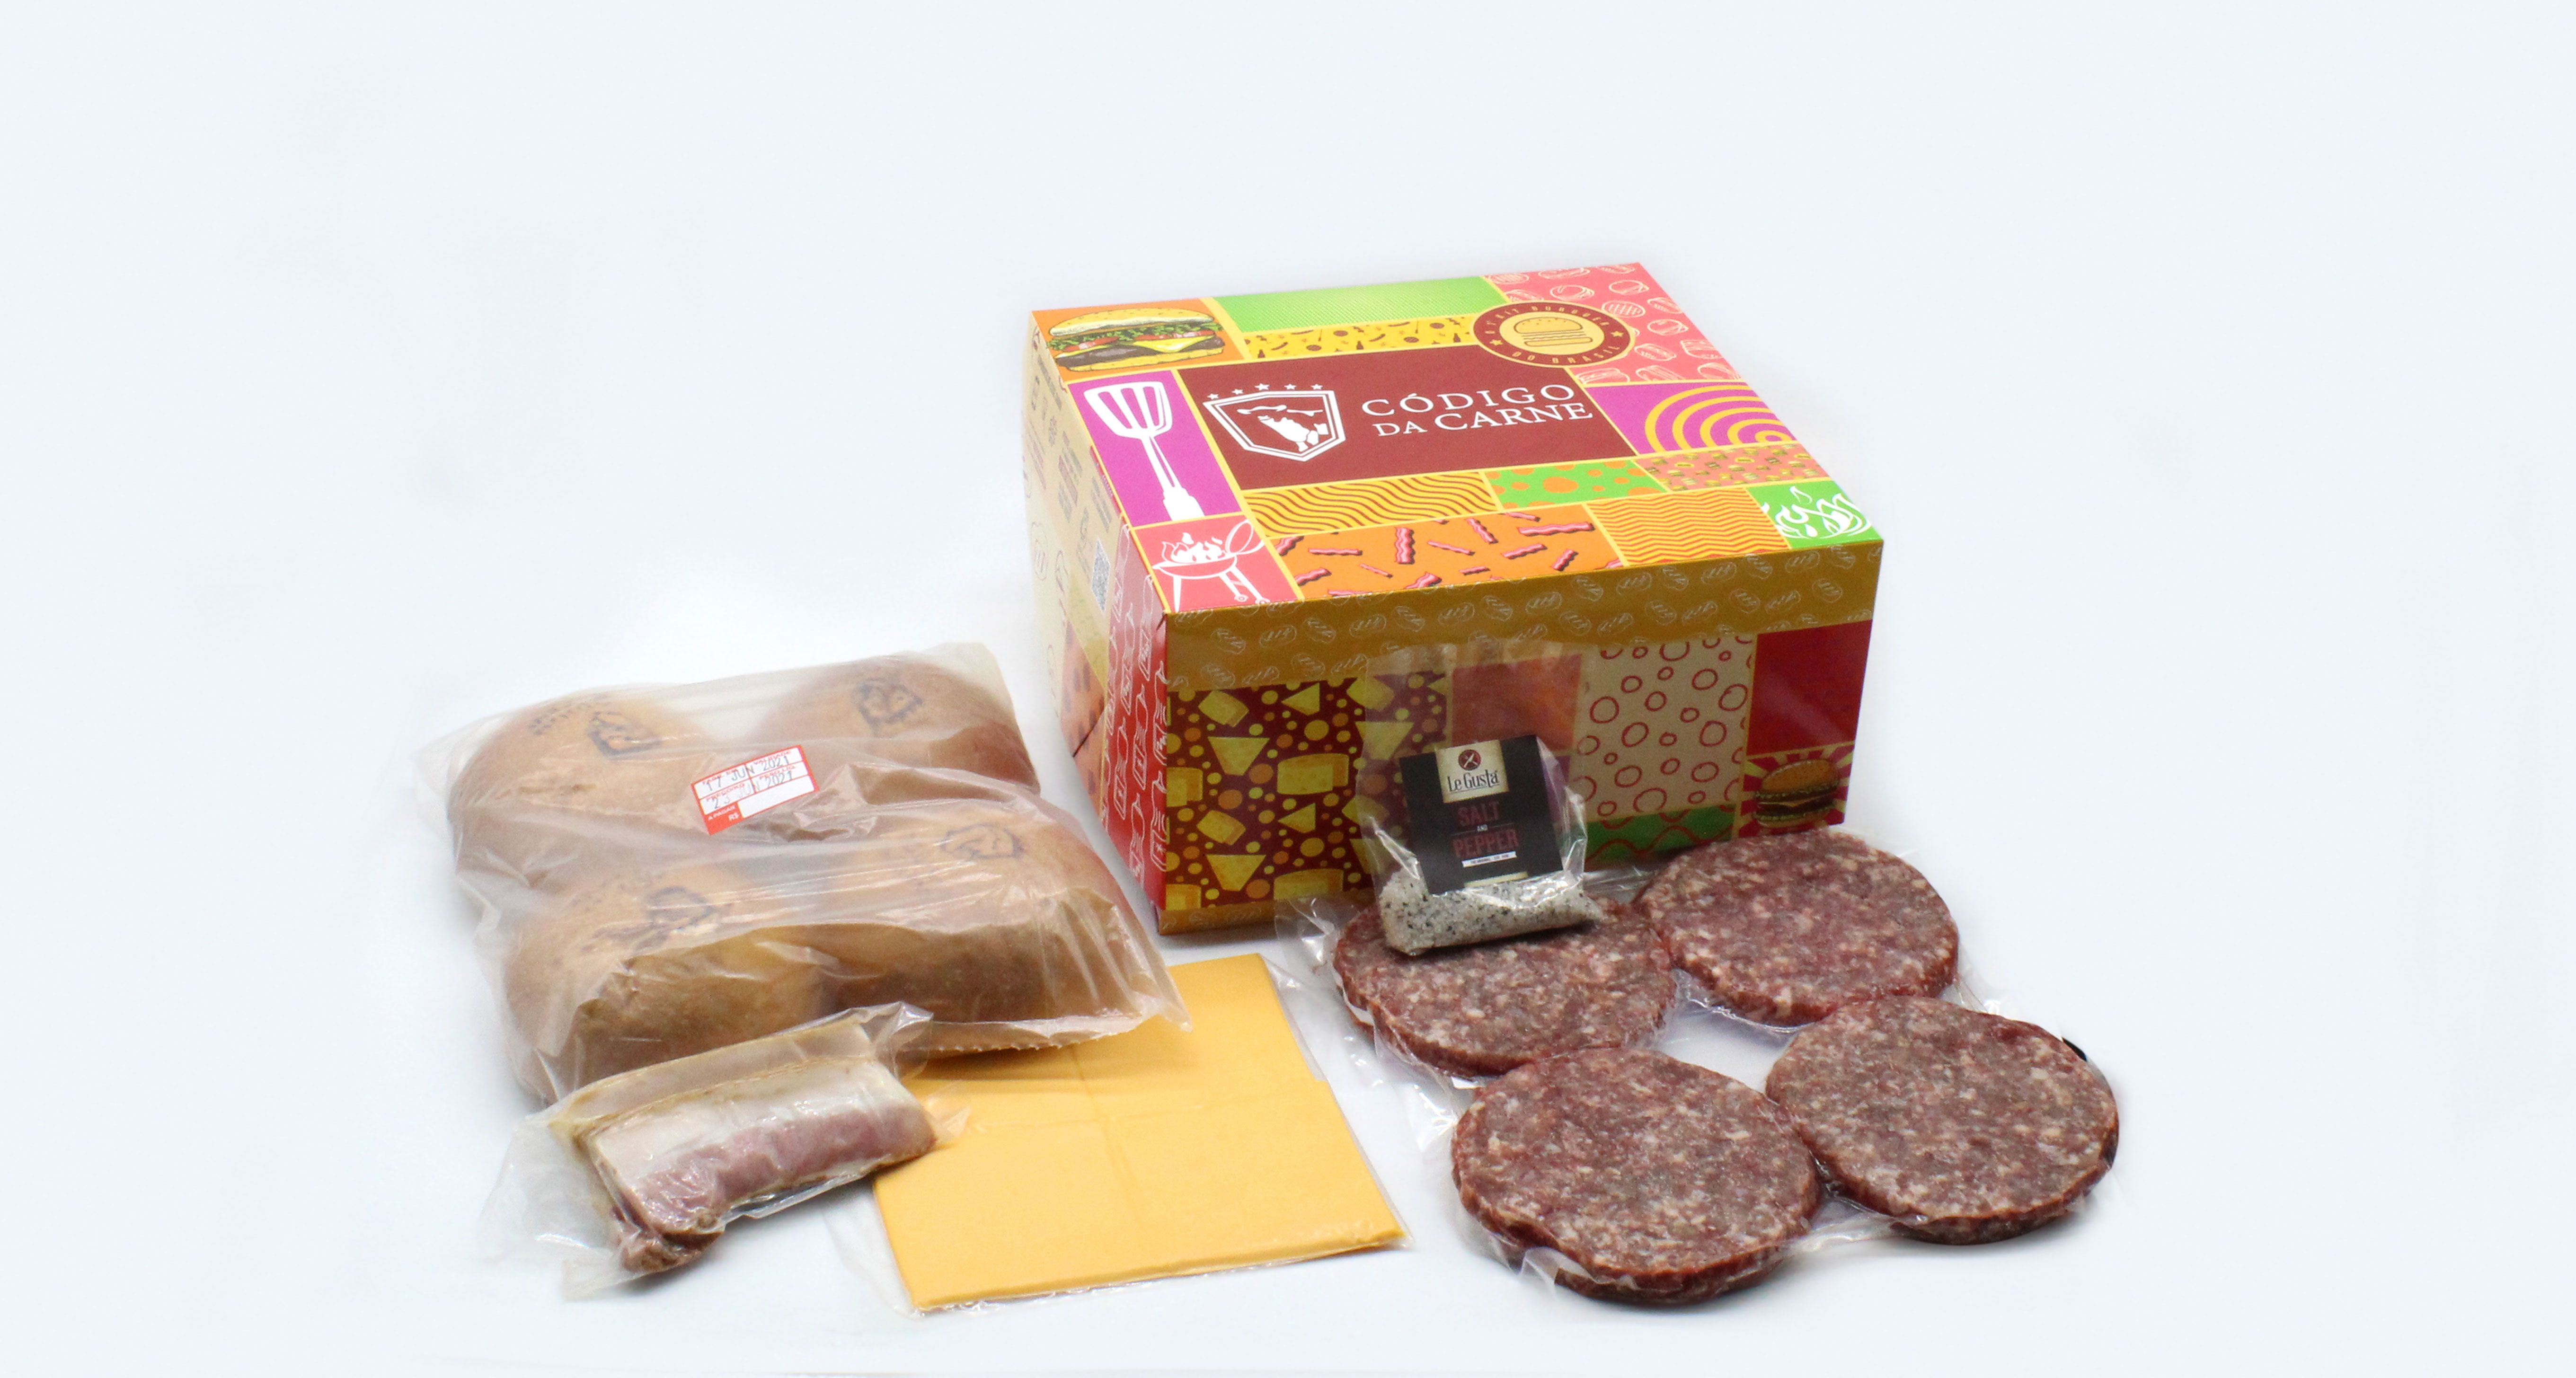 Paper packaging brings fun and information for food preparation